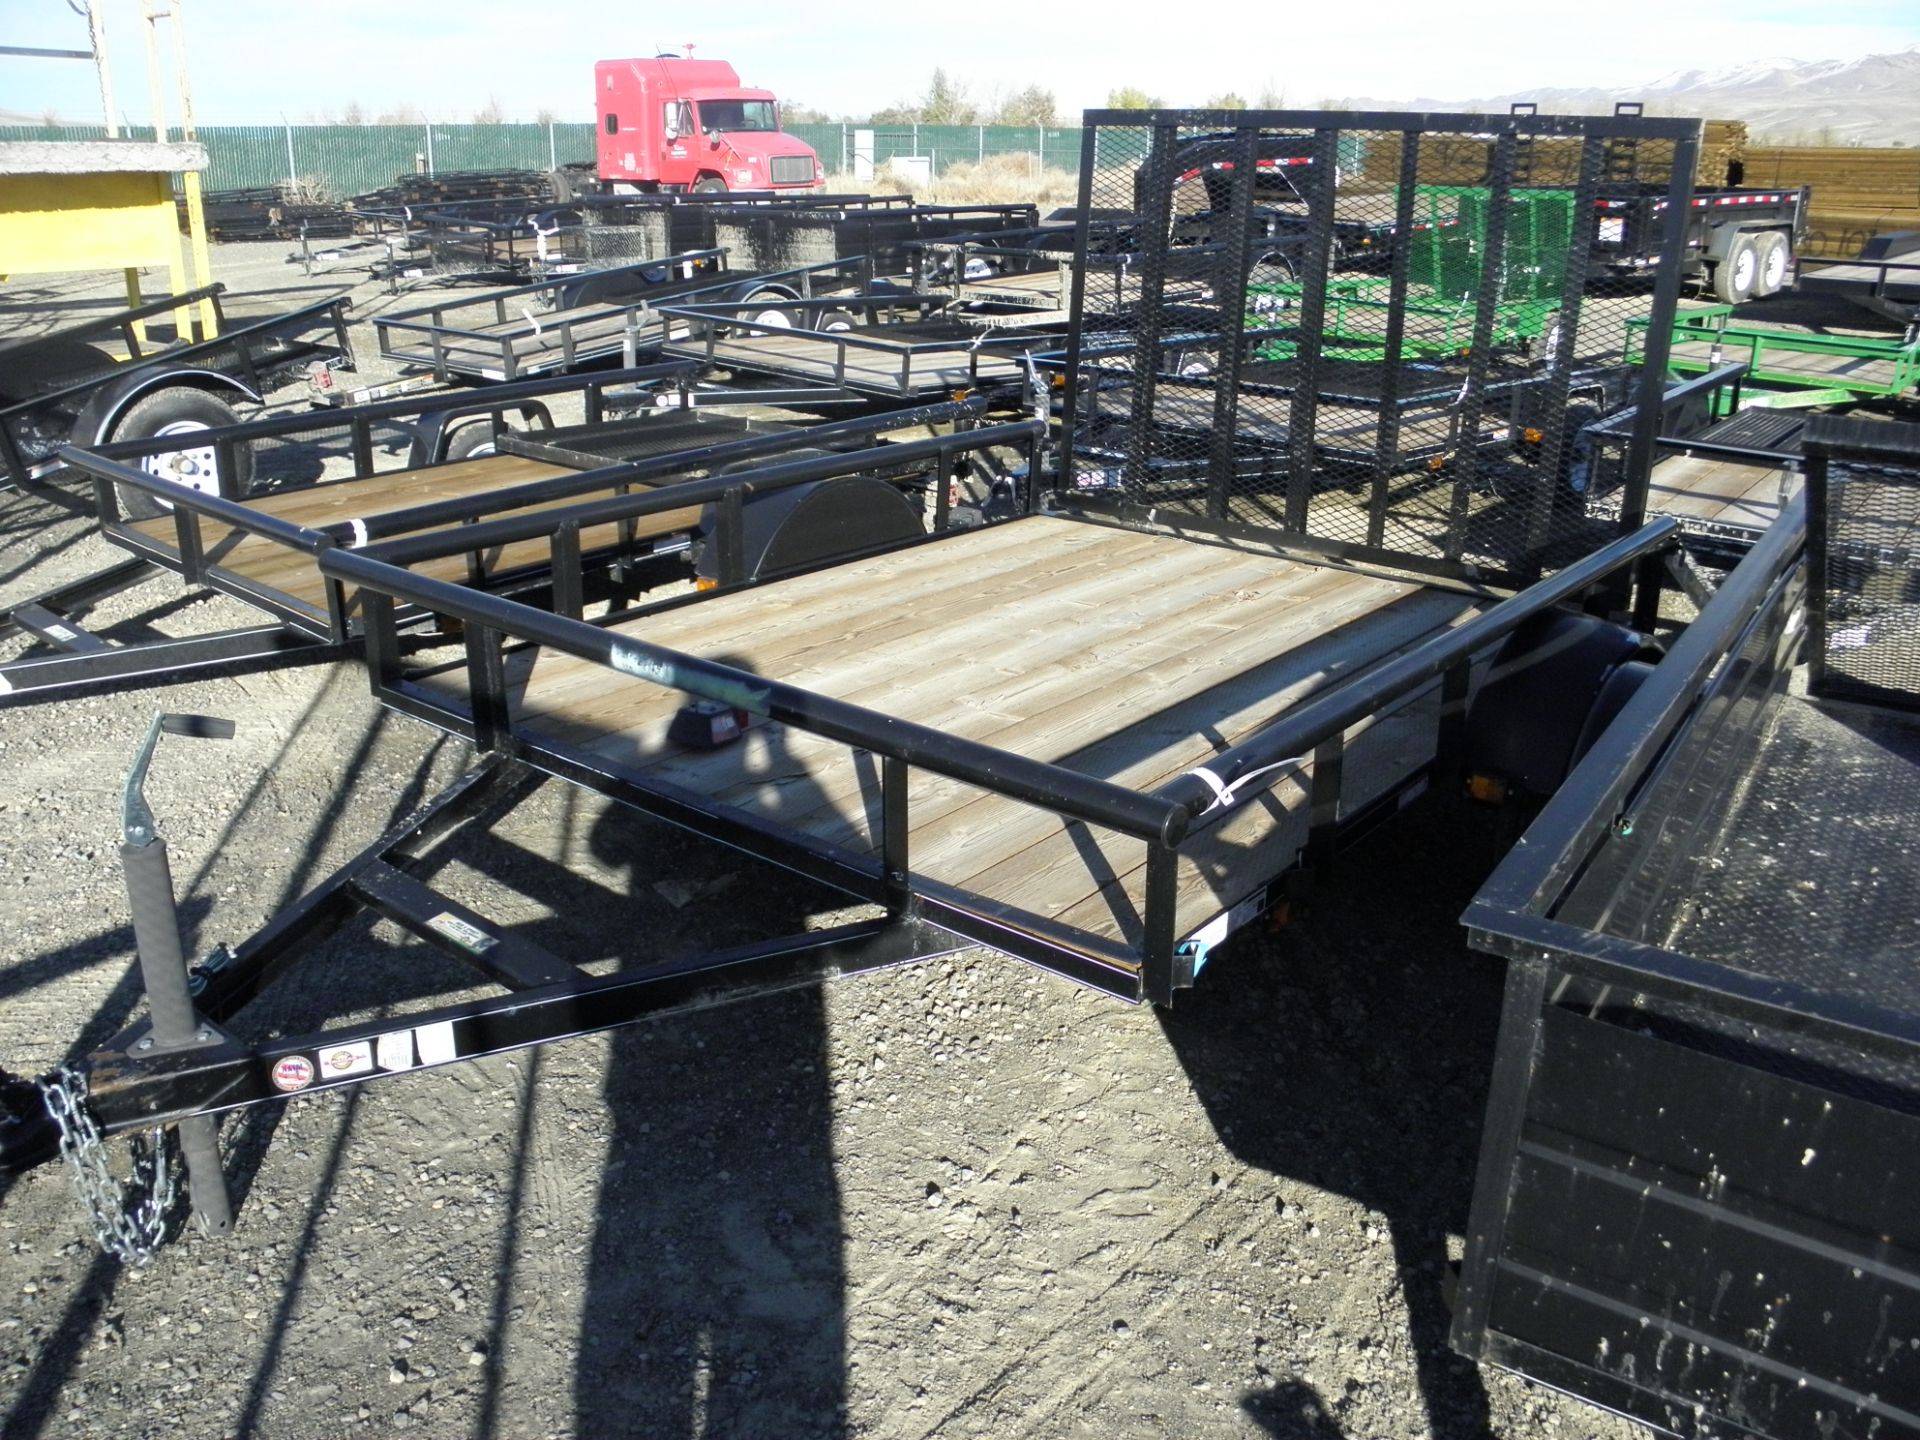 6' X 8' single axle flatbed w/pipe rail side, expanded metal ramp, wood deck(damaged fenders)